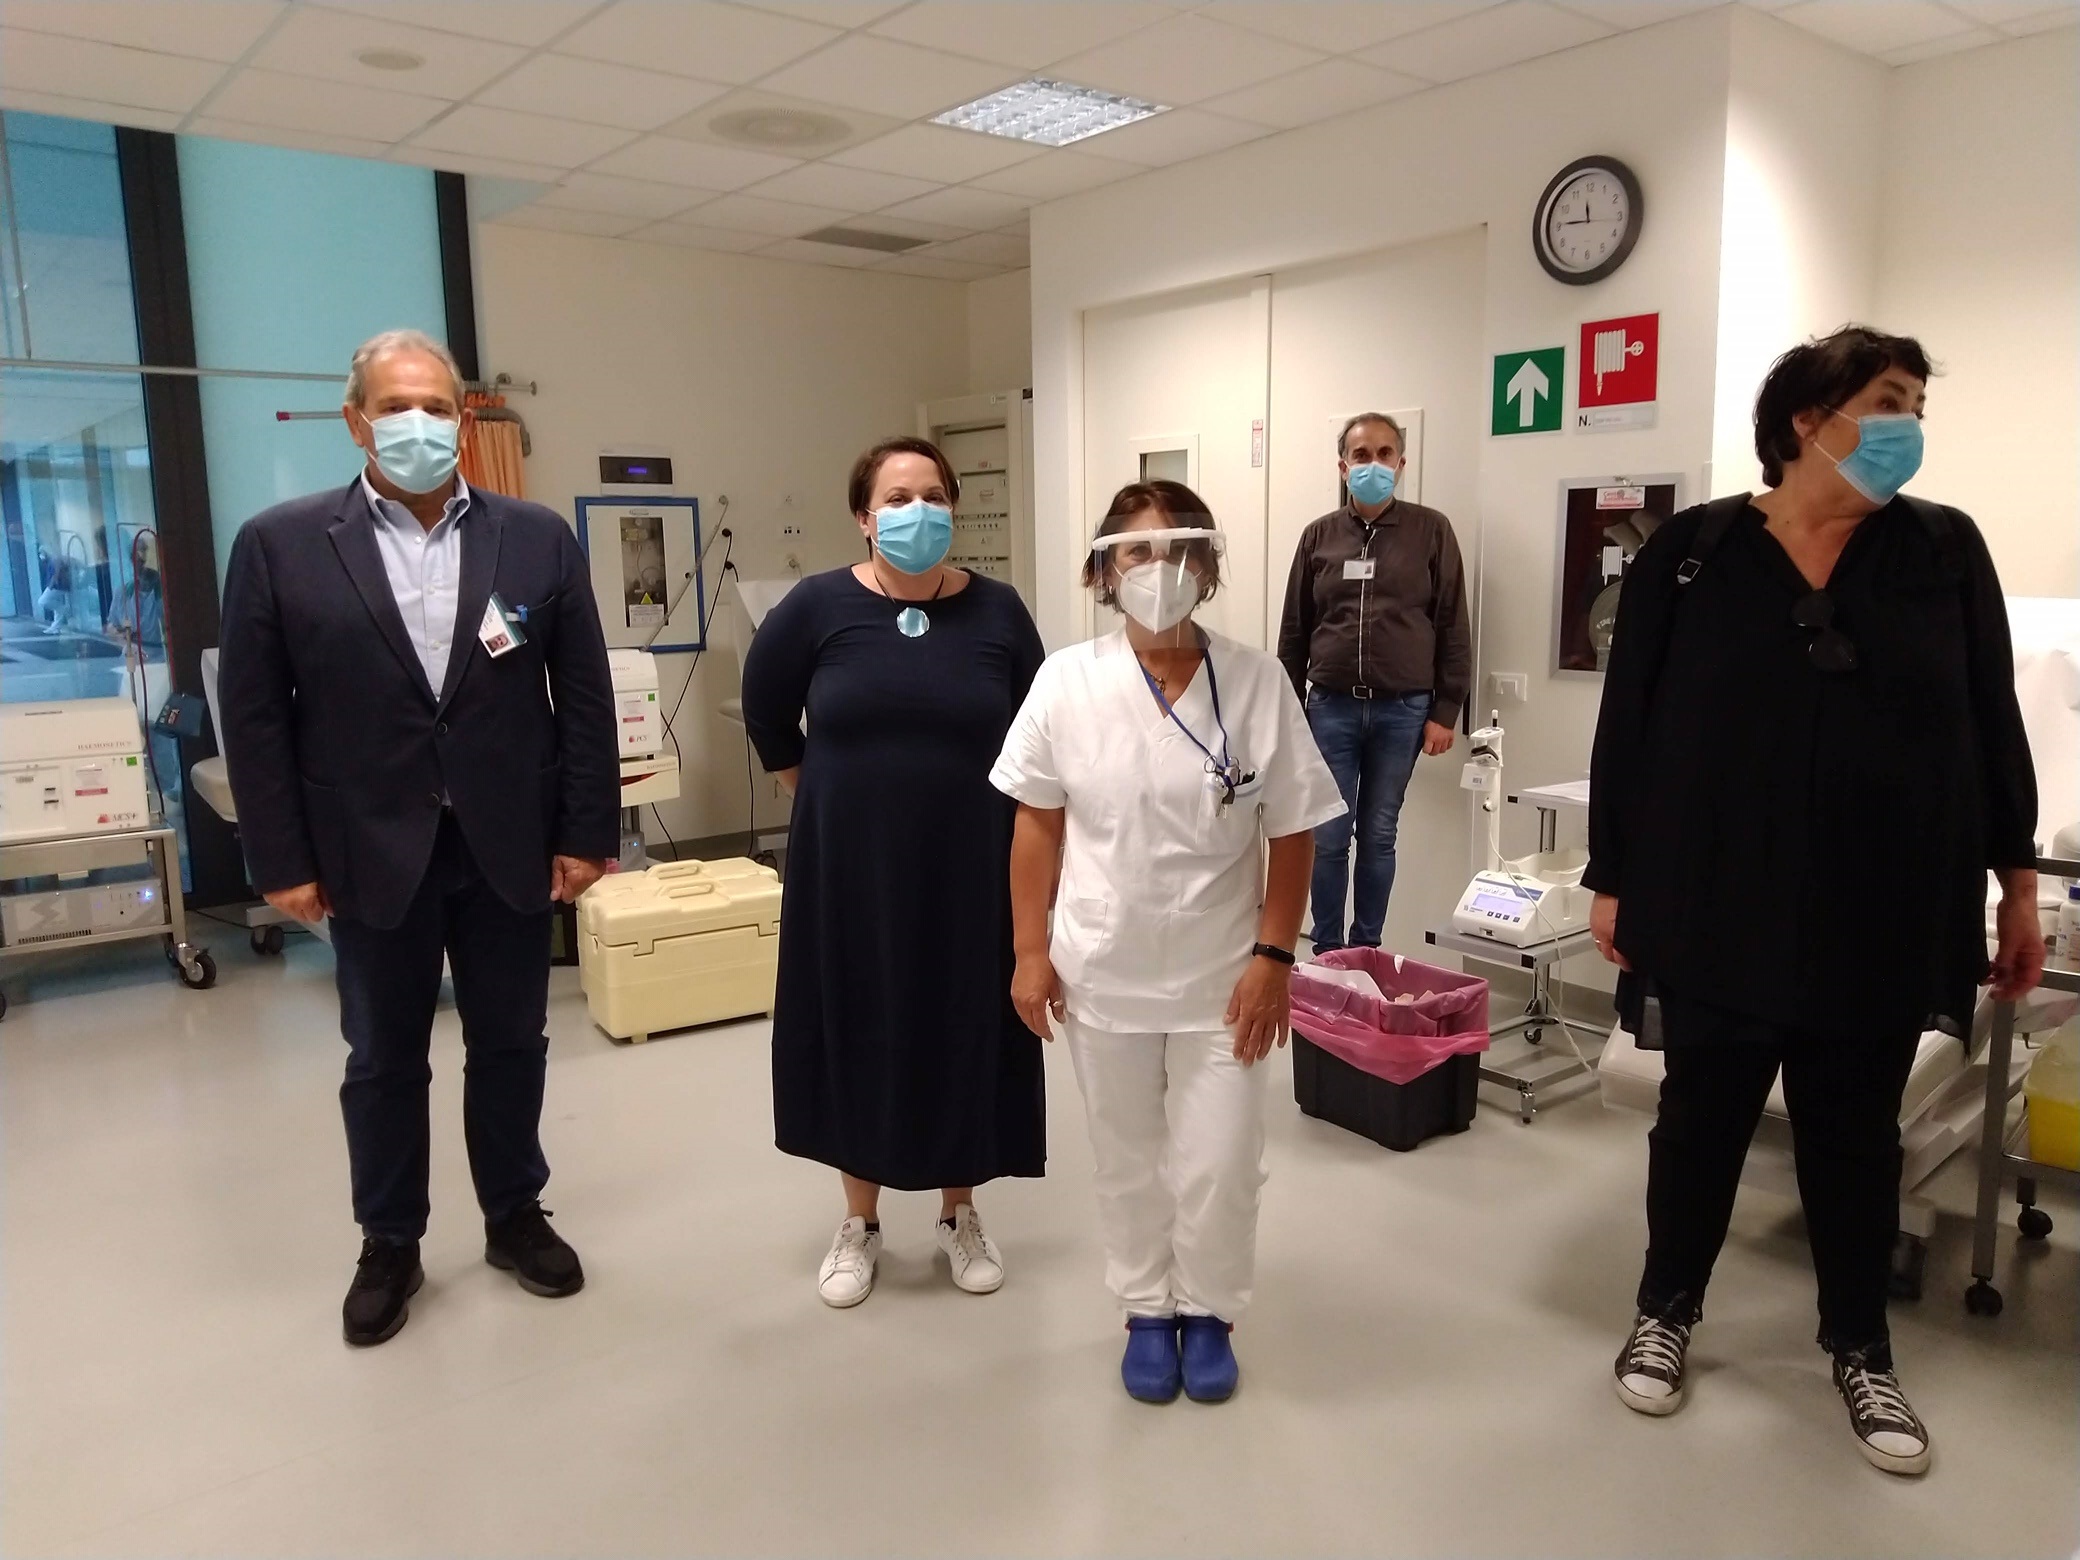 Health workers at San Luca Hospital in Italy benefited from 250 face shields delivered in partnership with the nonprofit organisation La Città delle Donne.